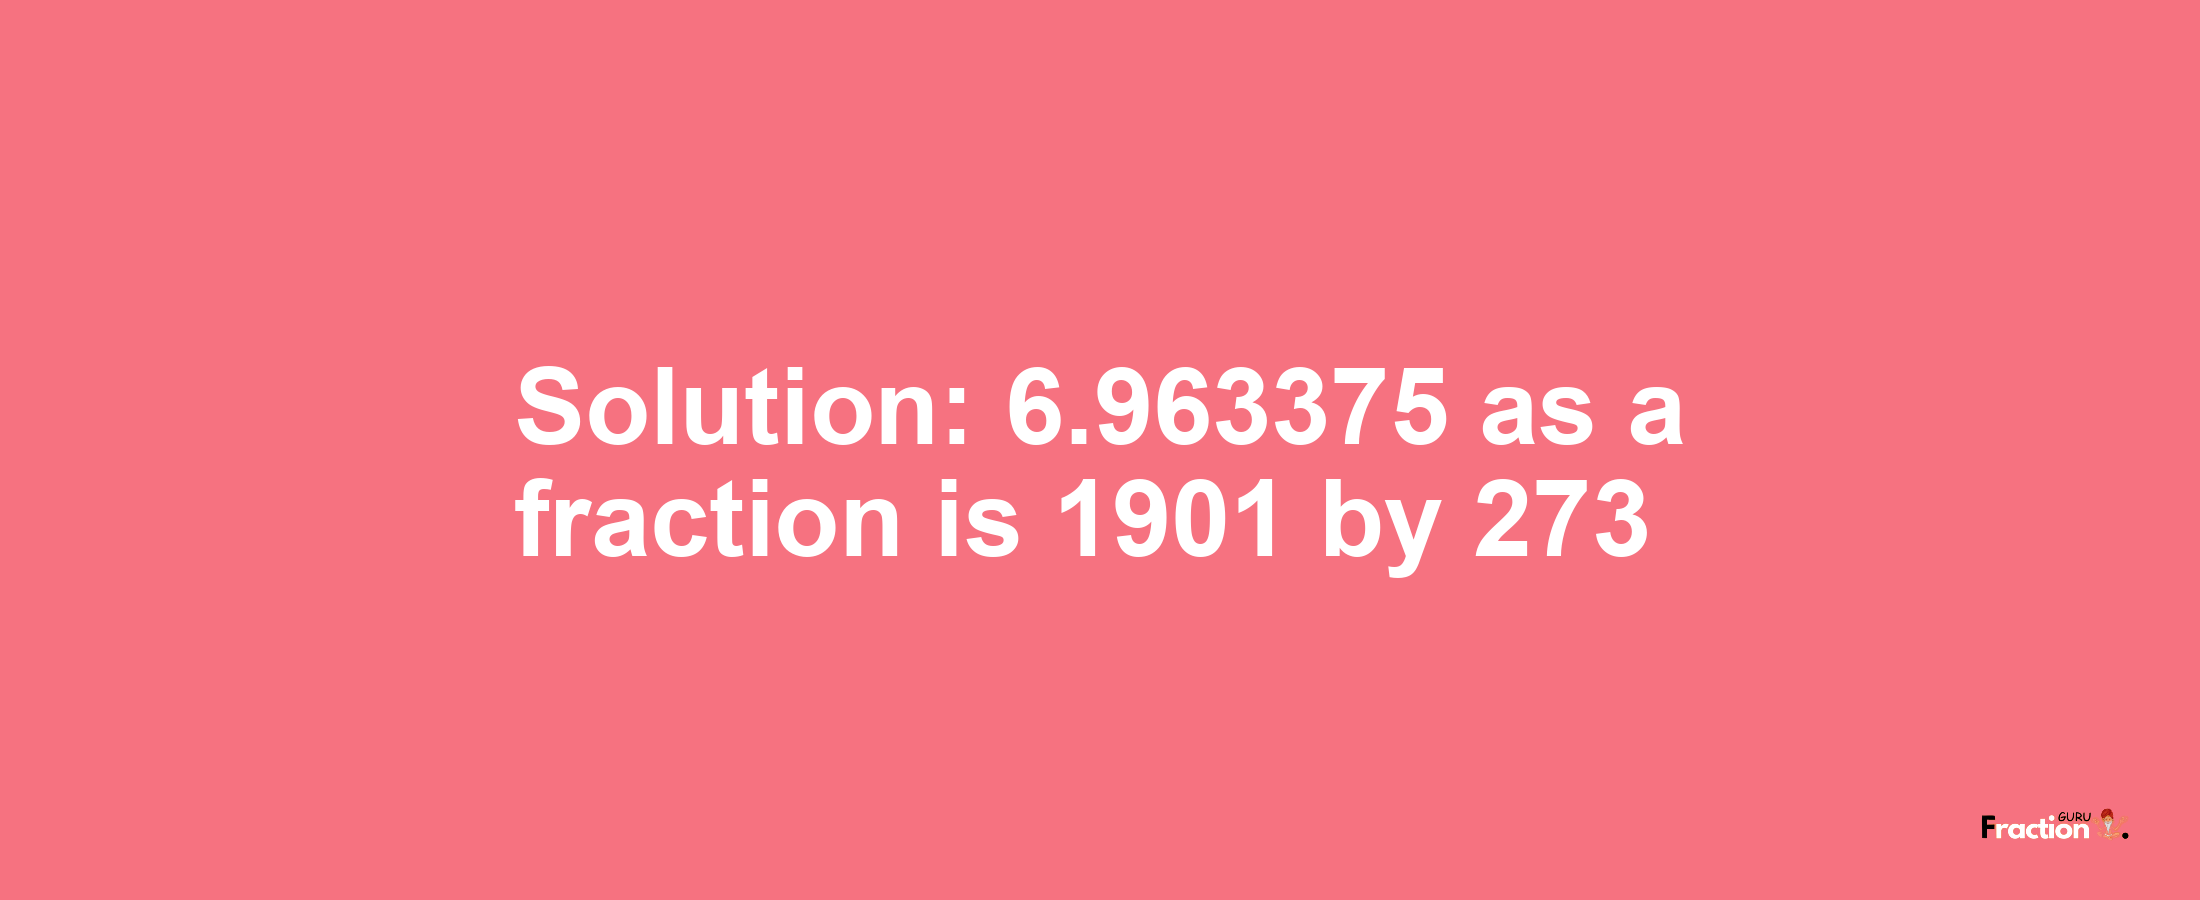 Solution:6.963375 as a fraction is 1901/273